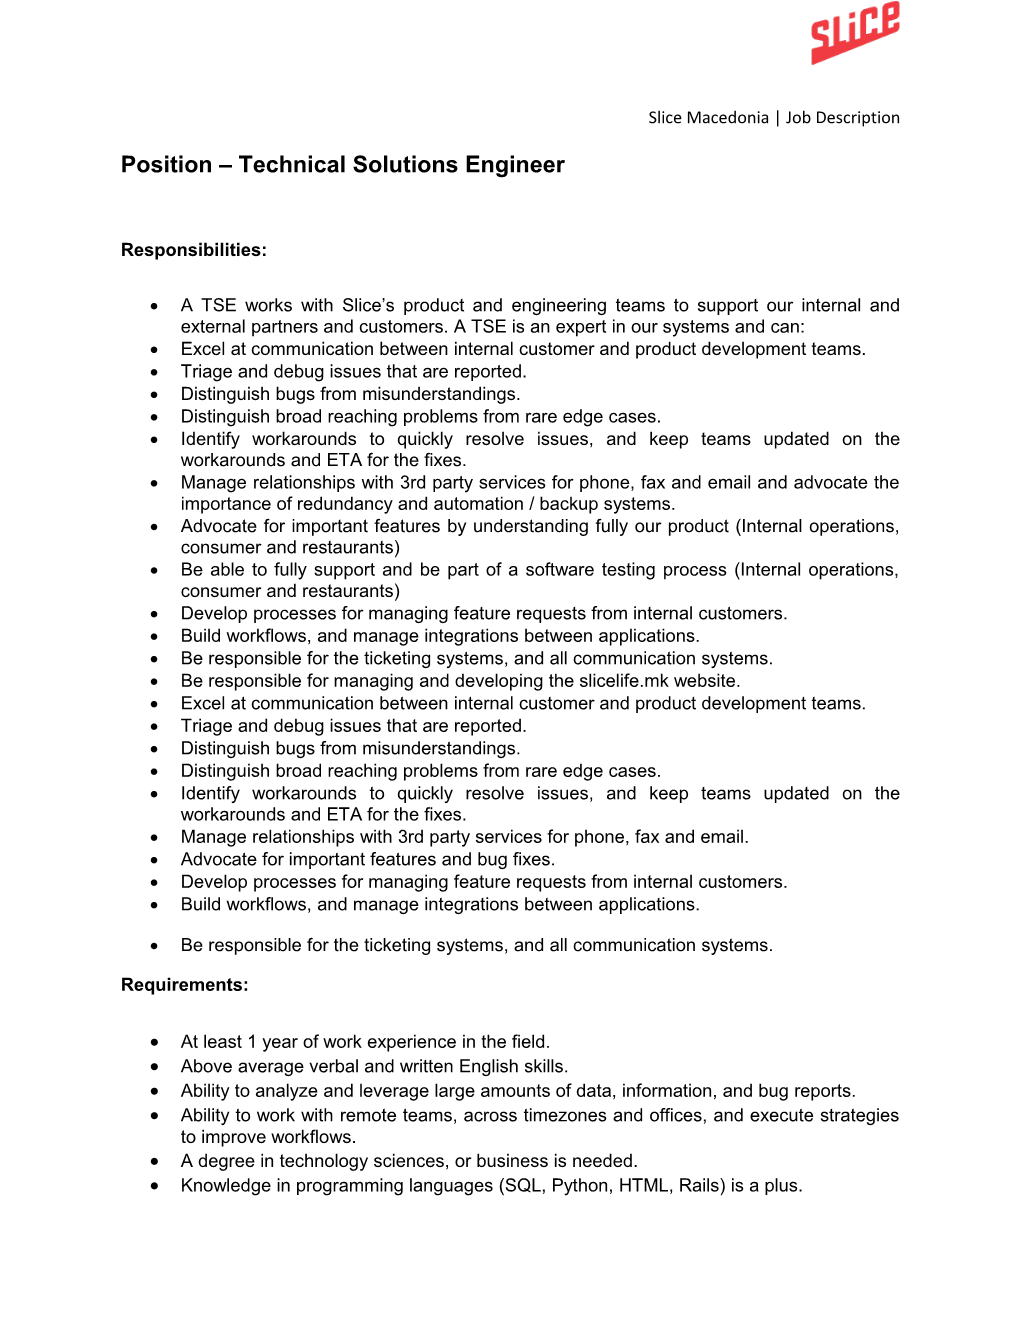 Position Technical Solutions Engineer